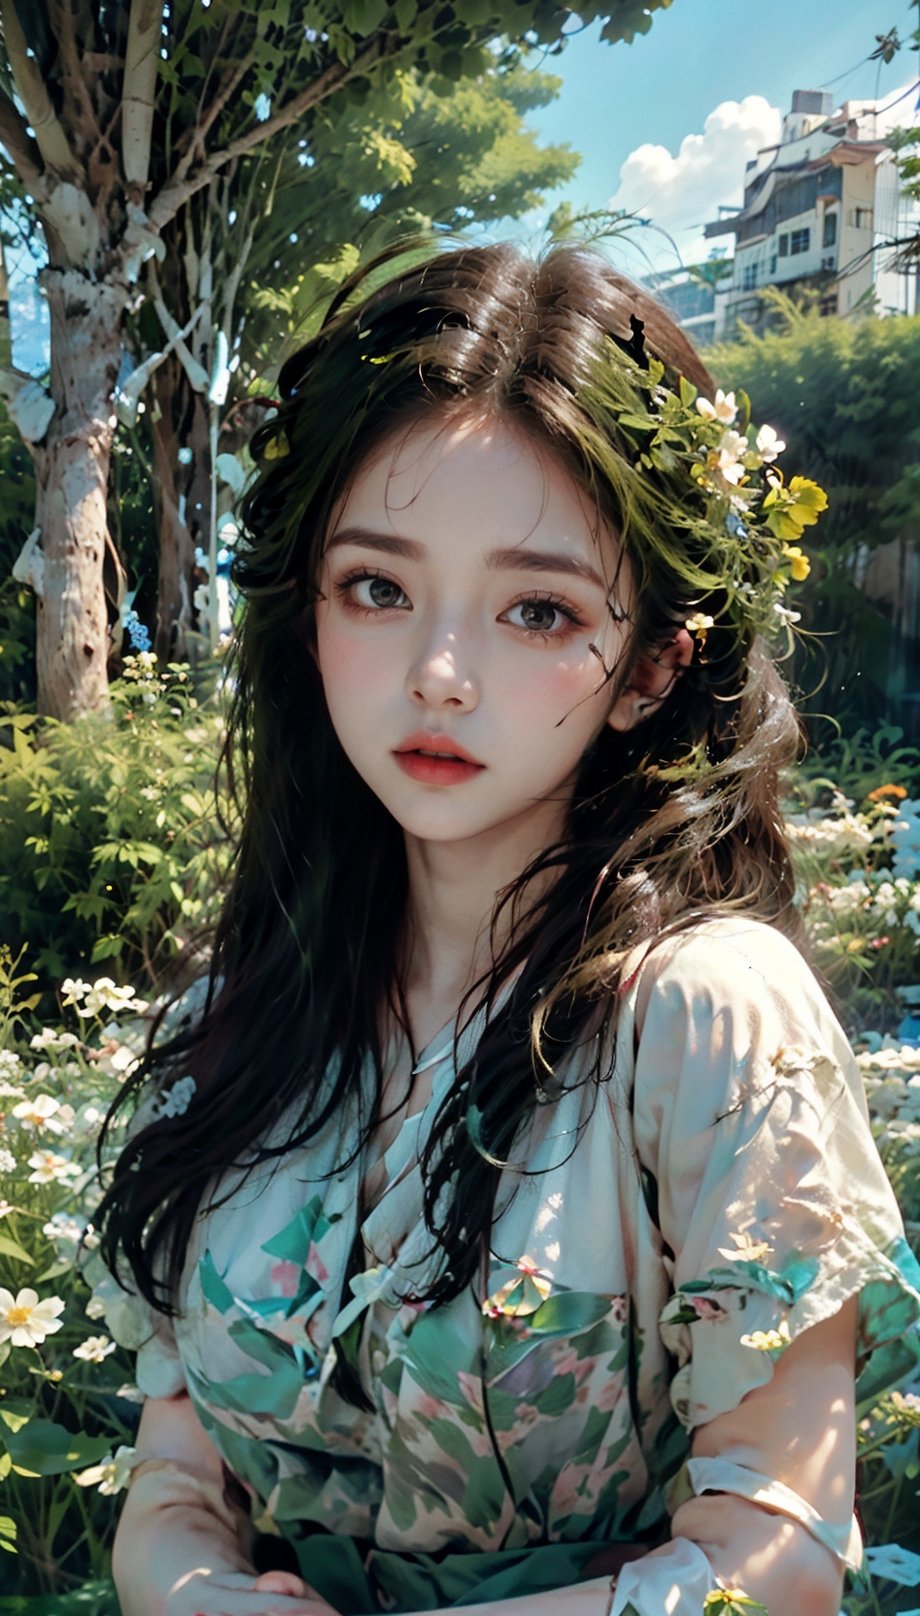 Anachronistic double exposure, surreal mixture of girl portrait and flower field landscape, roses and trees, sculptural solidity, minimalism, bright green emulsion, muted green and soft sky blue, photography,masterpiece